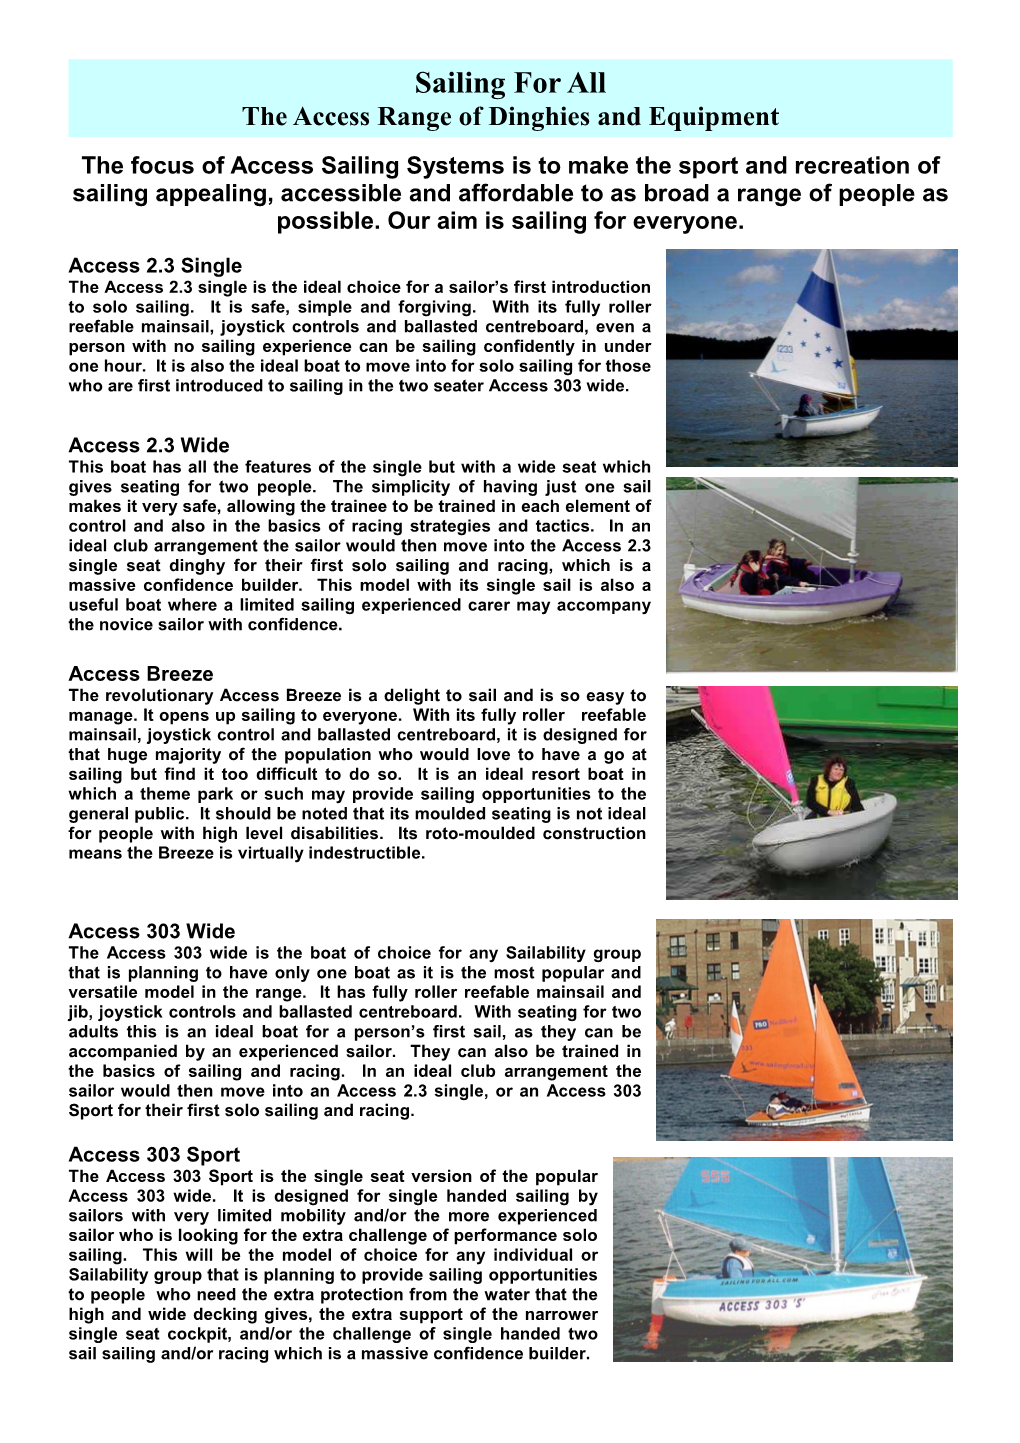 Single All Access Boats and Equipment Flier